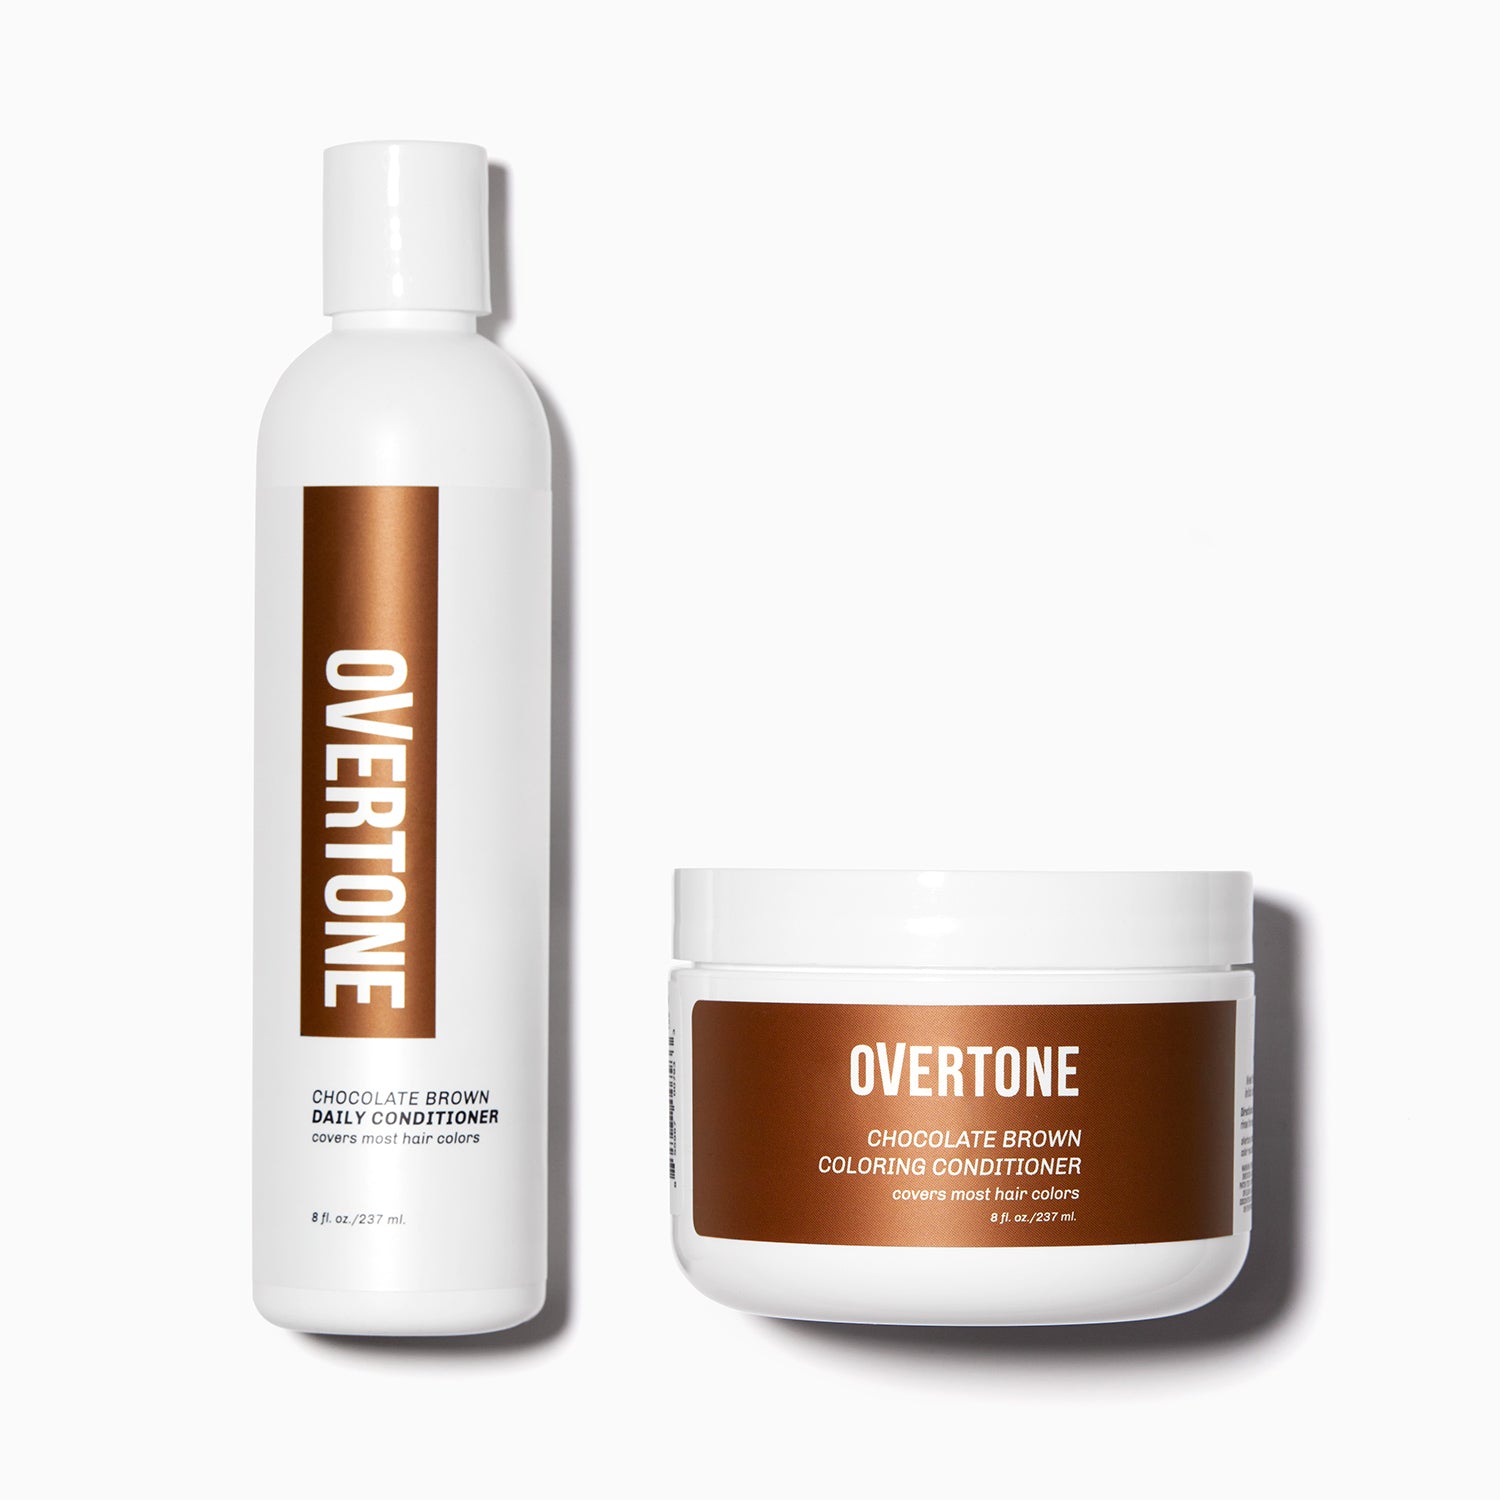 oVertone Chocolate Brown Coloring Conditioner and Daily Conditioner